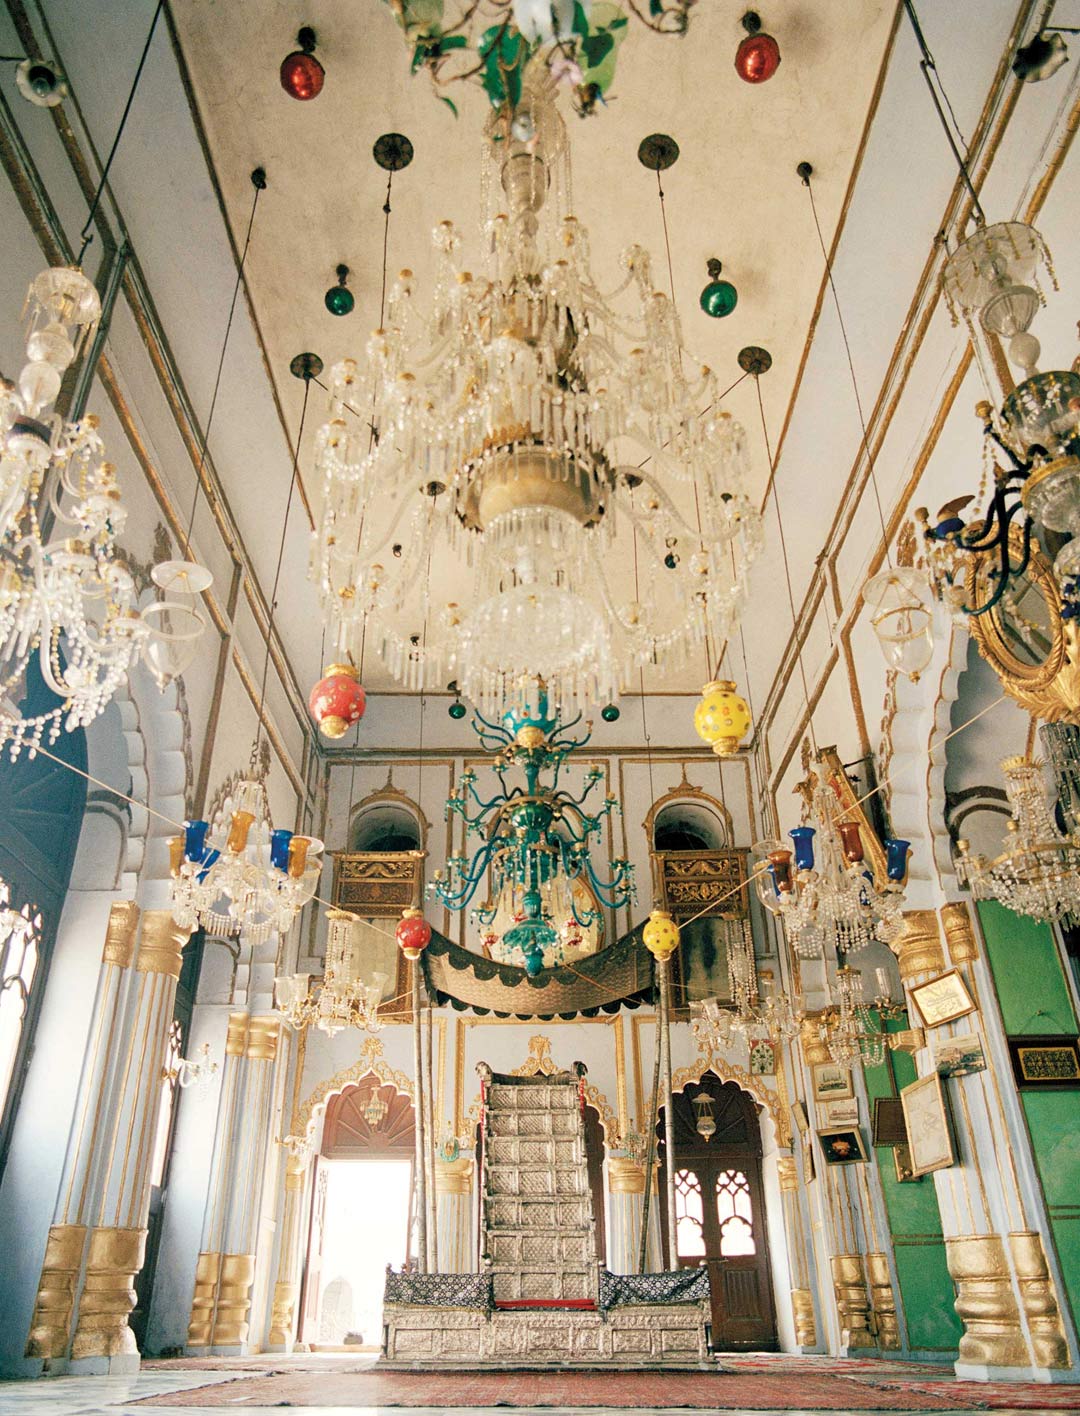 The ornate interiors of the Chota Imambara, built in 1837 as a mausoleum for the ninth Nawab of Awadh, Muhammad Ali Shah.